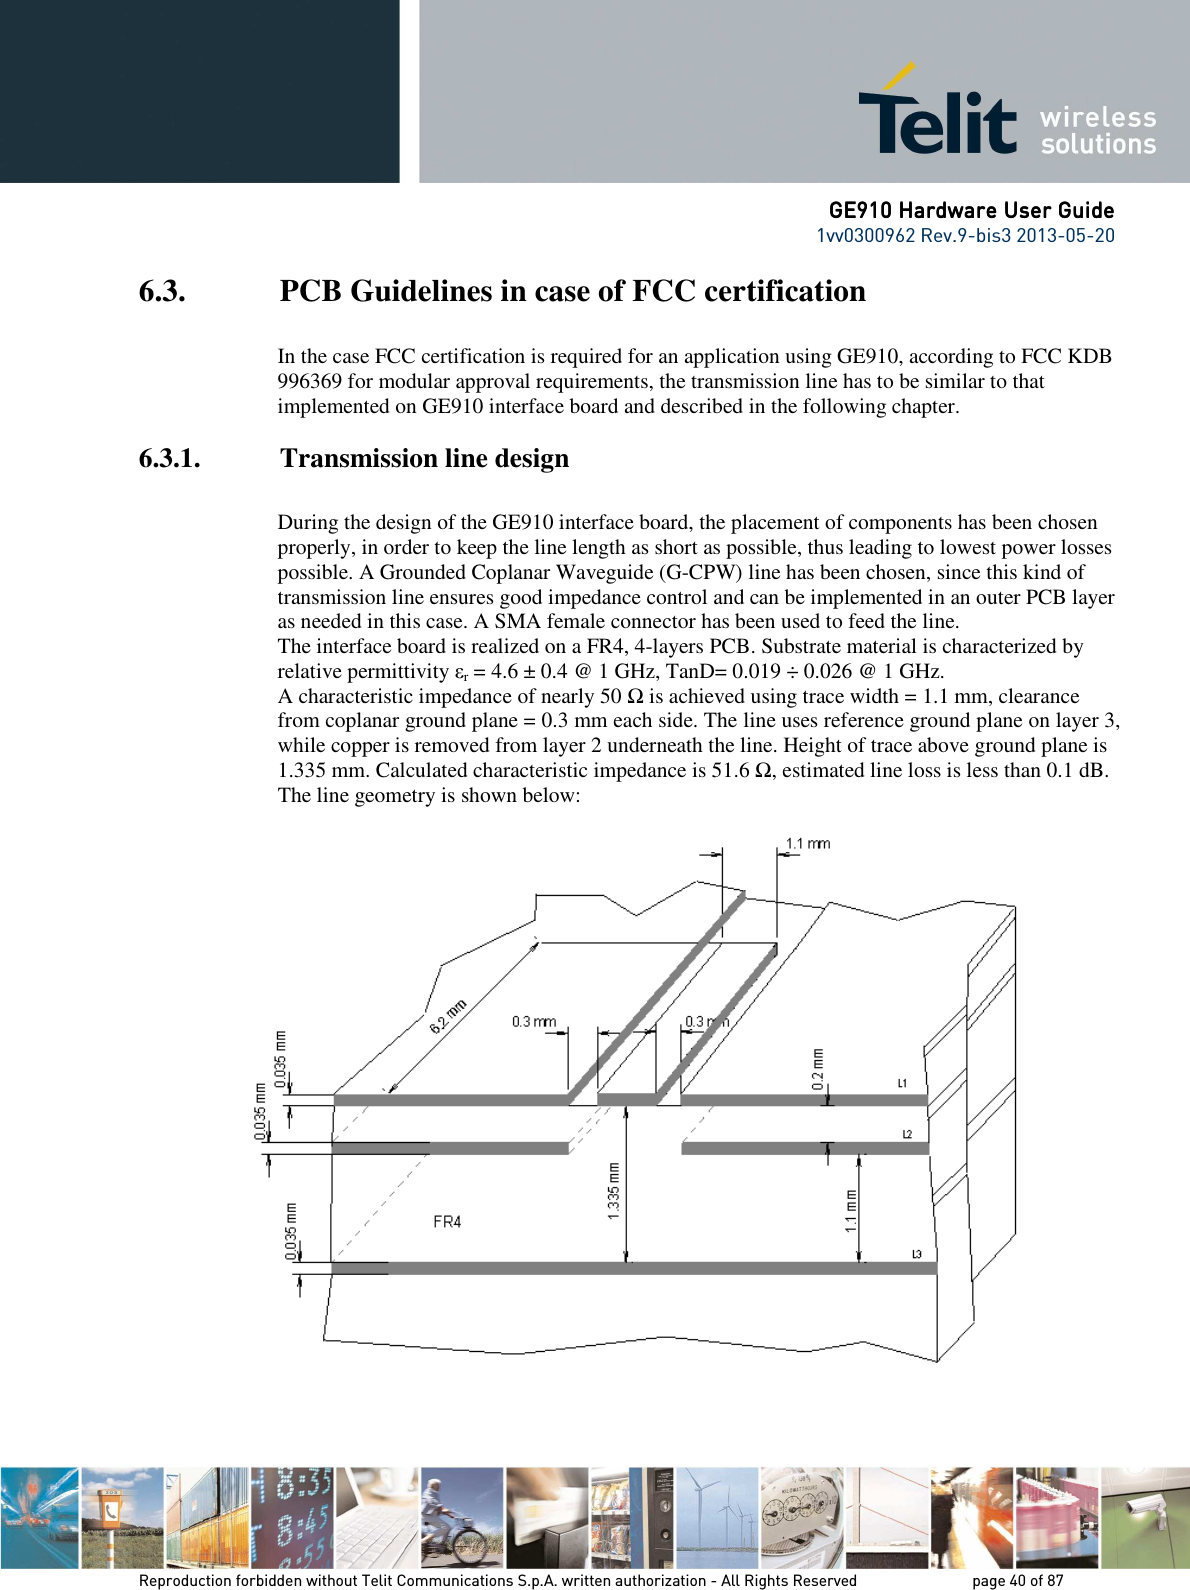      GE910 Hardware User GuideGE910 Hardware User GuideGE910 Hardware User GuideGE910 Hardware User Guide    1vv0300962 Rev.9-bis3 2013-05-20   Reproduction forbidden without Telit Communications S.p.A. written authorization - All Rights Reserved    page 40 of 87 Mod. 0805 2011-07 Rev.2 6.3. PCB Guidelines in case of FCC certification  In the case FCC certification is required for an application using GE910, according to FCC KDB 996369 for modular approval requirements, the transmission line has to be similar to that implemented on GE910 interface board and described in the following chapter. 6.3.1. Transmission line design  During the design of the GE910 interface board, the placement of components has been chosen properly, in order to keep the line length as short as possible, thus leading to lowest power losses possible. A Grounded Coplanar Waveguide (G-CPW) line has been chosen, since this kind of transmission line ensures good impedance control and can be implemented in an outer PCB layer as needed in this case. A SMA female connector has been used to feed the line. The interface board is realized on a FR4, 4-layers PCB. Substrate material is characterized by relative permittivity εr = 4.6 ± 0.4 @ 1 GHz, TanD= 0.019 ÷ 0.026 @ 1 GHz. A characteristic impedance of nearly 50 Ω is achieved using trace width = 1.1 mm, clearance from coplanar ground plane = 0.3 mm each side. The line uses reference ground plane on layer 3, while copper is removed from layer 2 underneath the line. Height of trace above ground plane is 1.335 mm. Calculated characteristic impedance is 51.6 Ω, estimated line loss is less than 0.1 dB. The line geometry is shown below:   